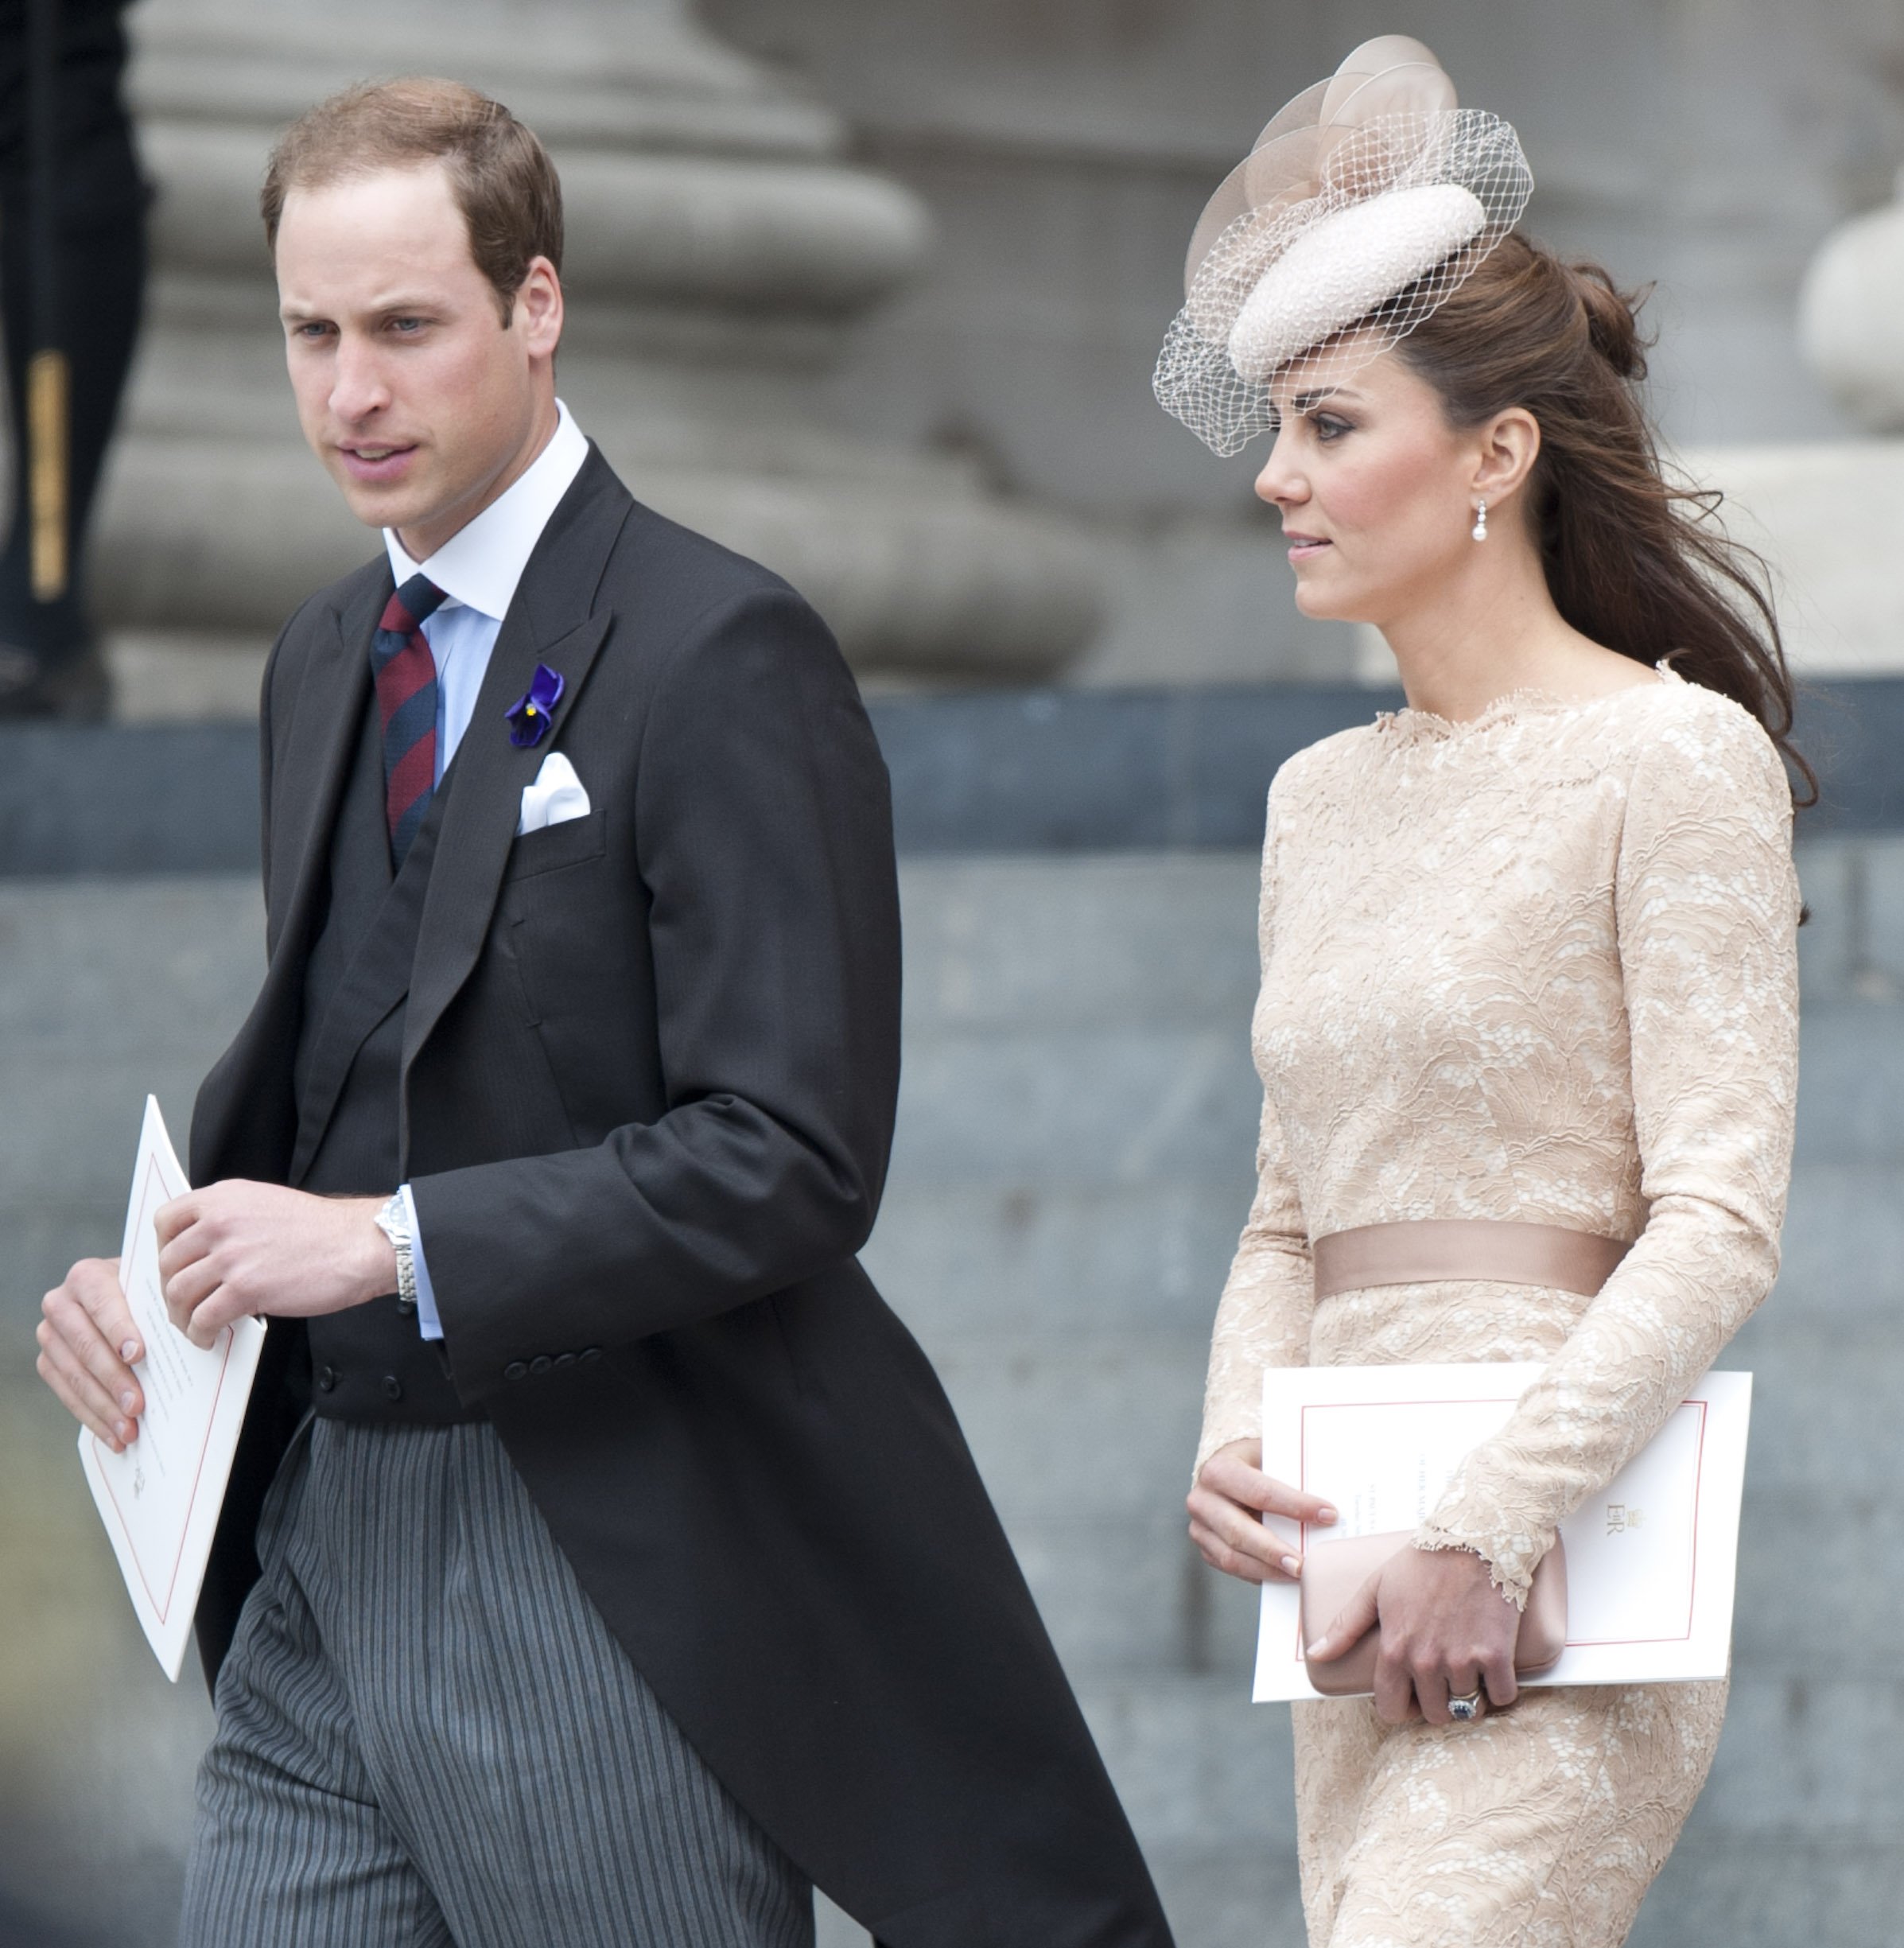 Prince William And Catherine, Duchess Of Cambridge at A National Service Of Thanksgiving At St Paul's Cathedral In London As Part Of The Diamond Jubilee Celebrations. | Source: Getty Images